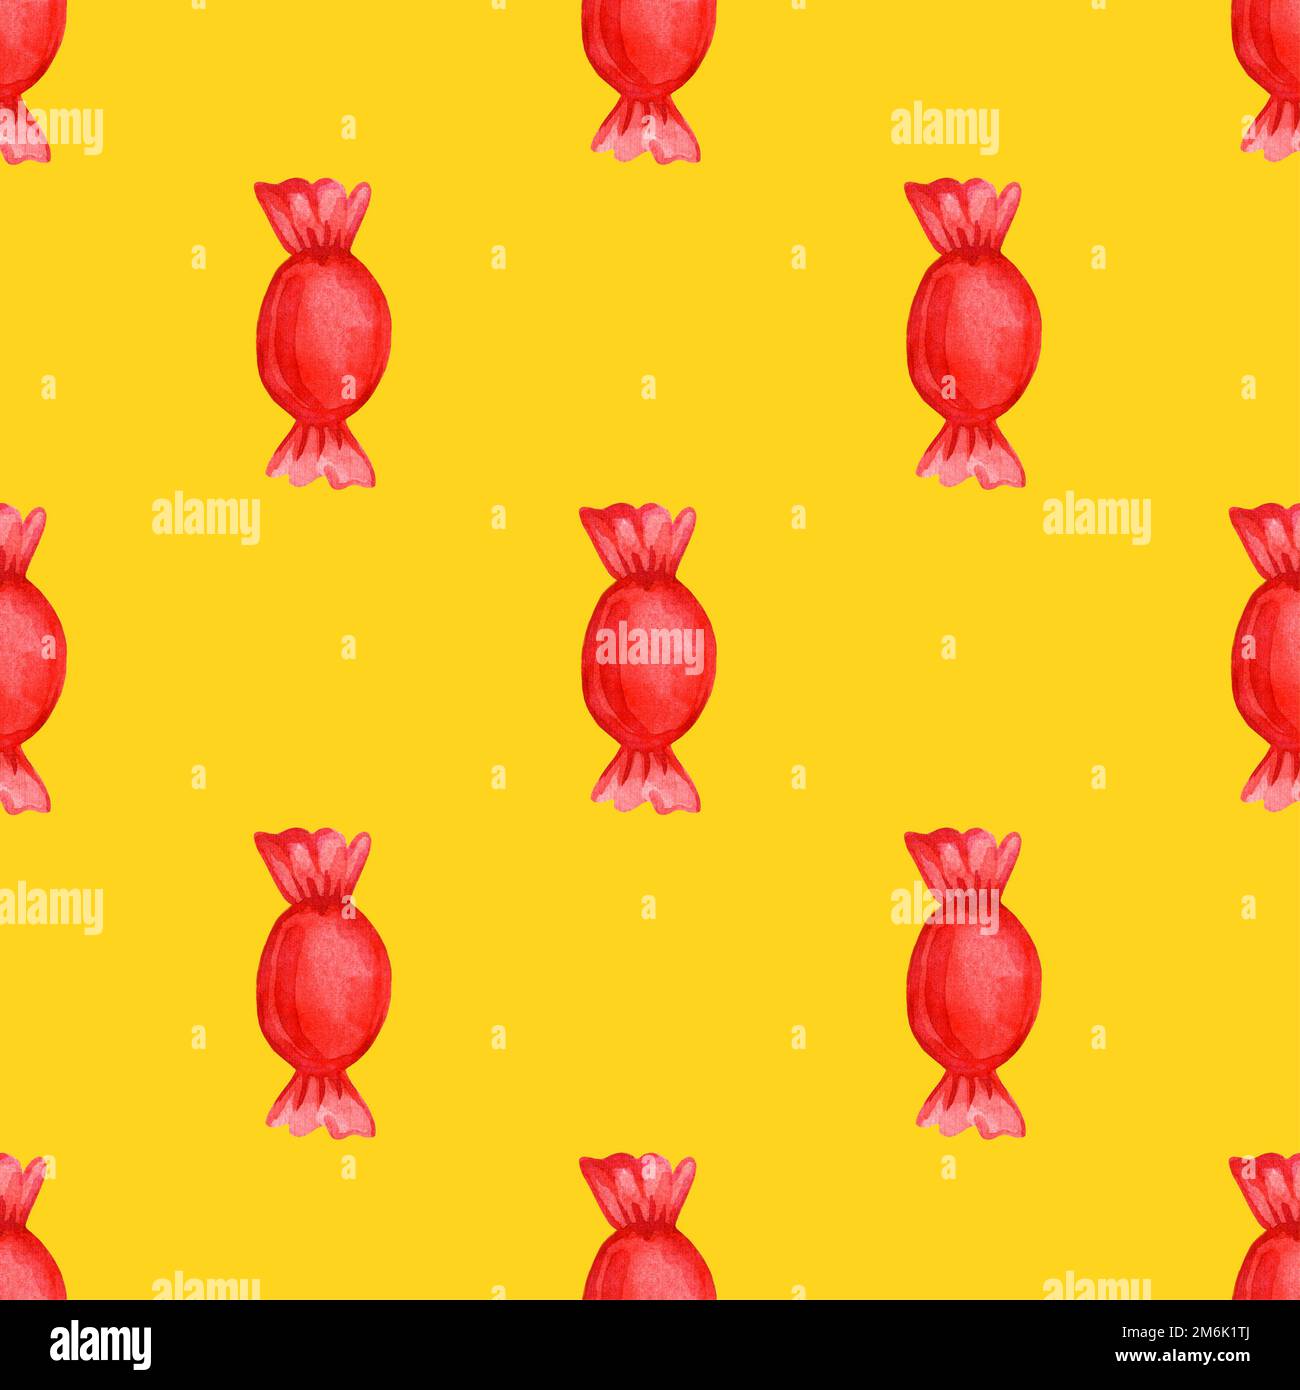 Festive seamless pattern with candy in a red wrapper Stock Photo